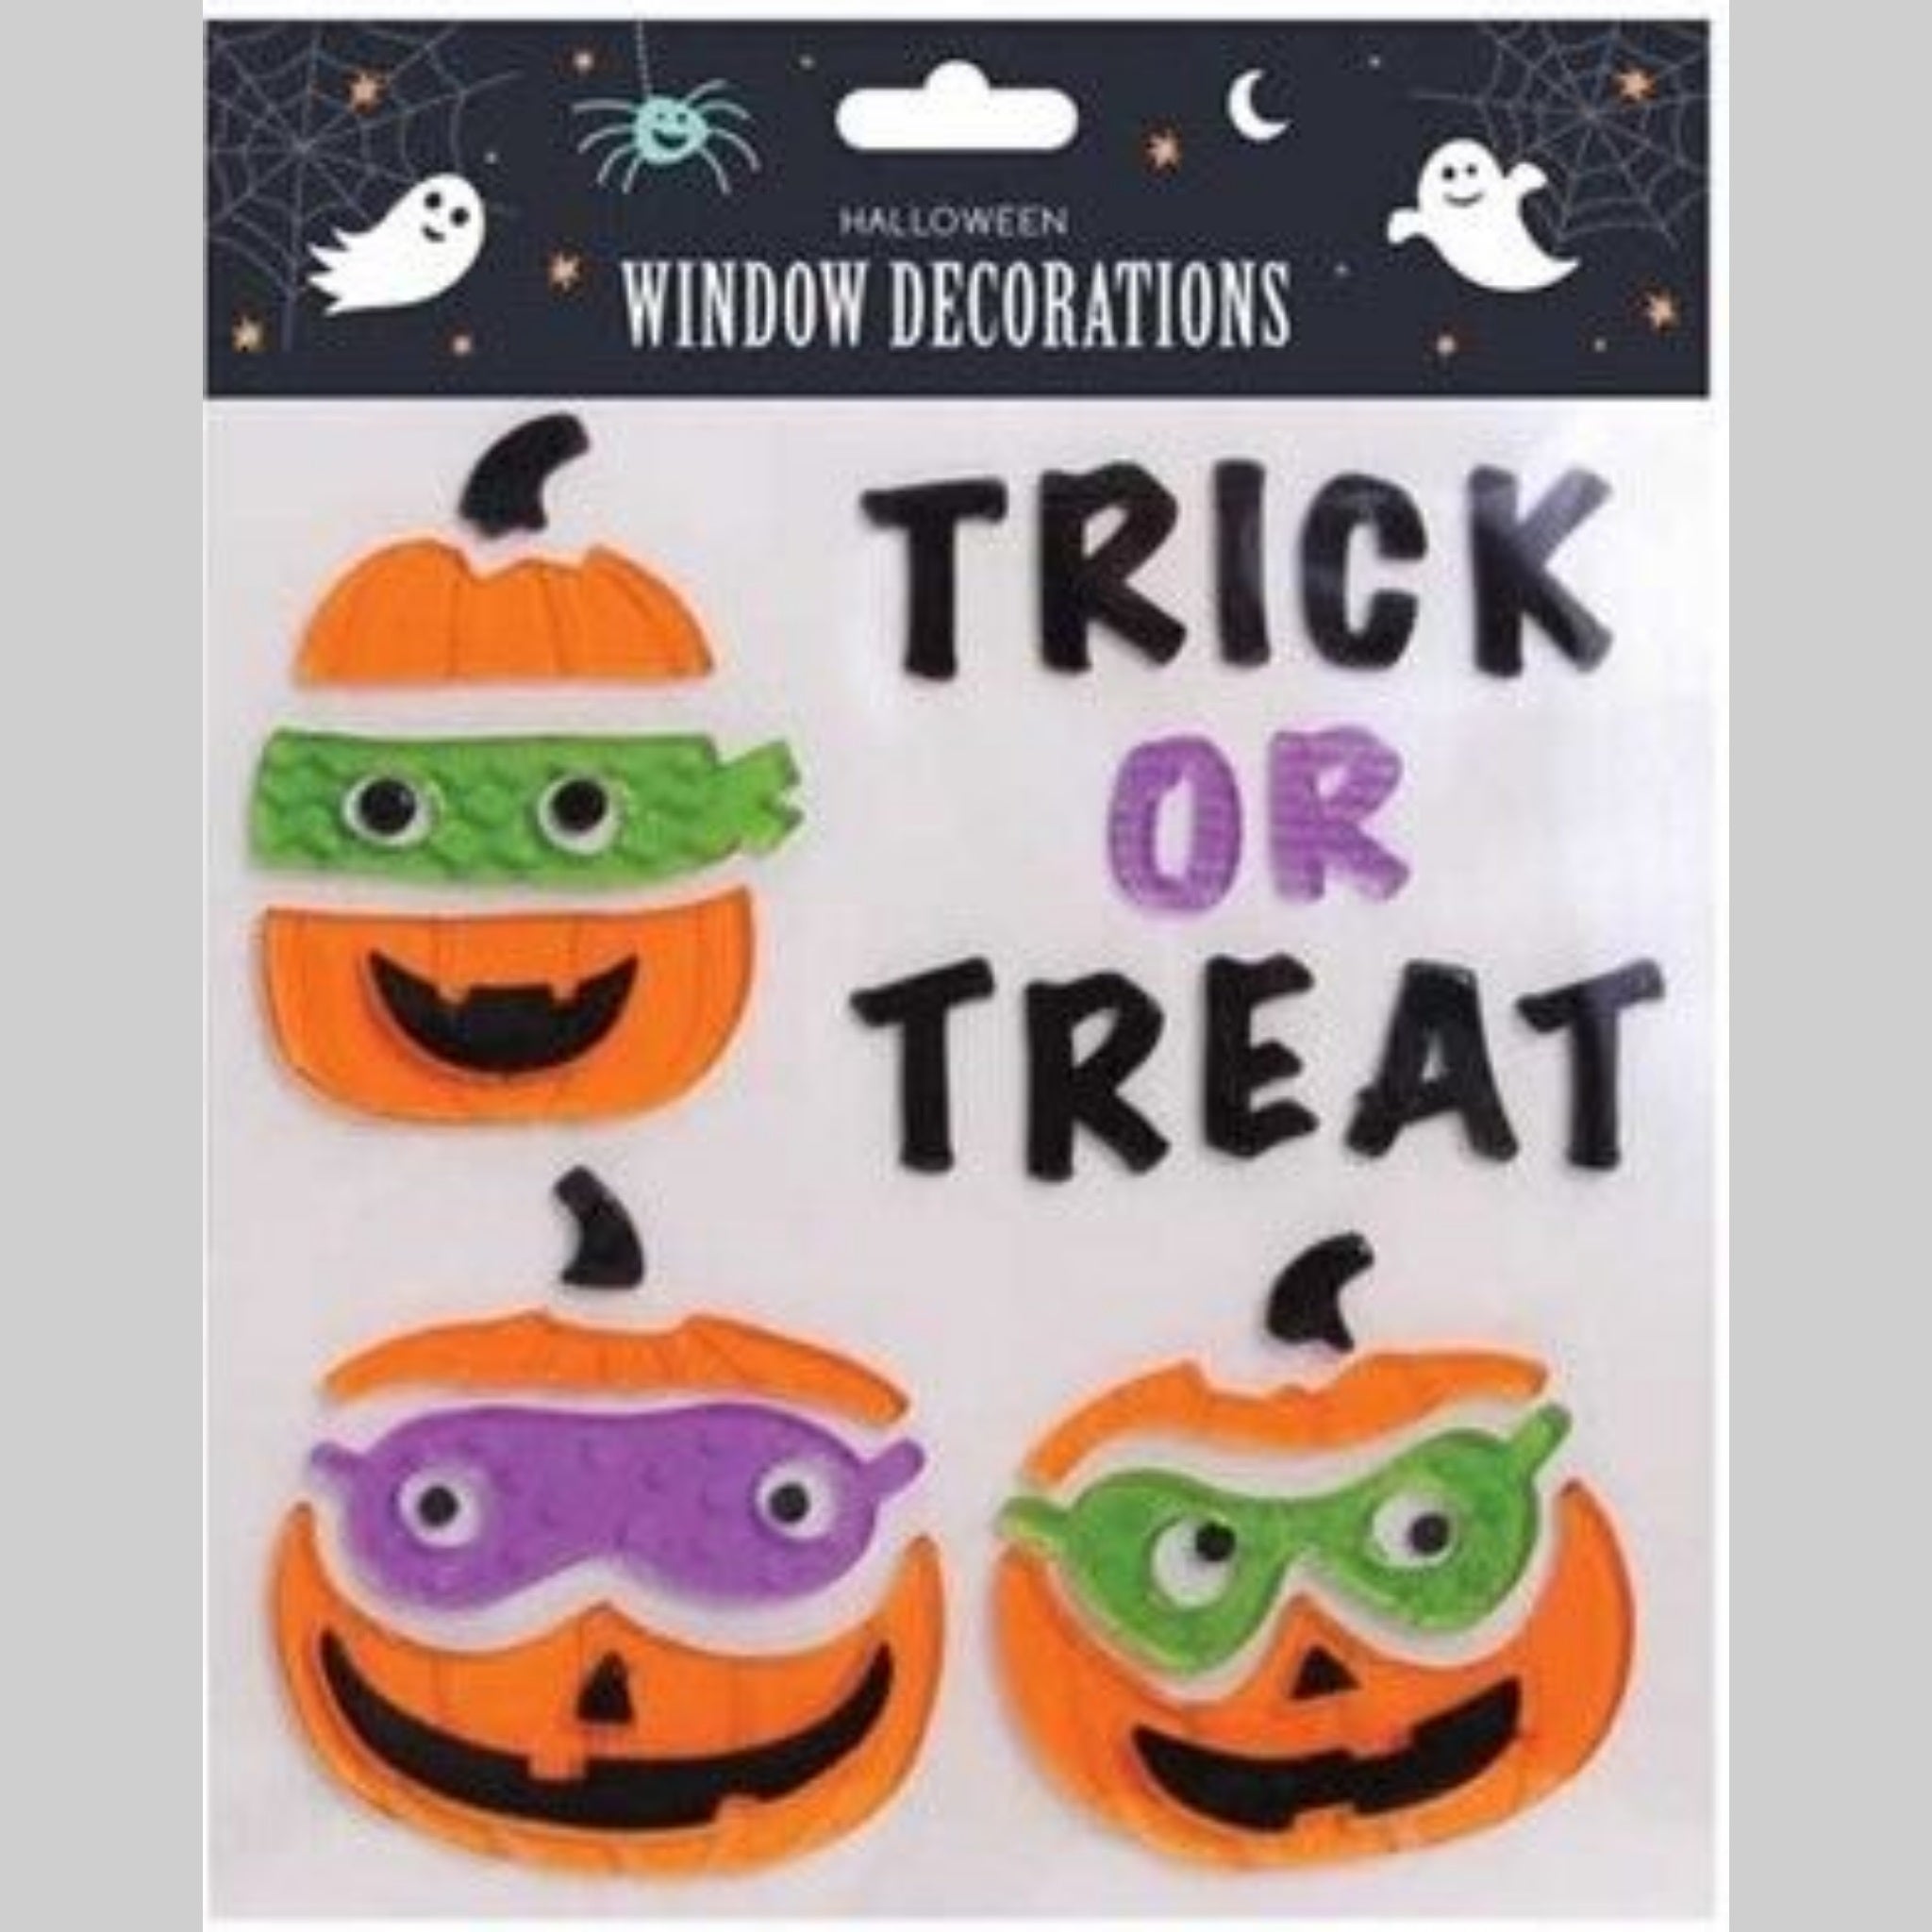 Beclen Harp Halloween Character Gel Clings Window Stickers Decoration/ Assorted Spooky Scary Trick or Treat House Party Decorations